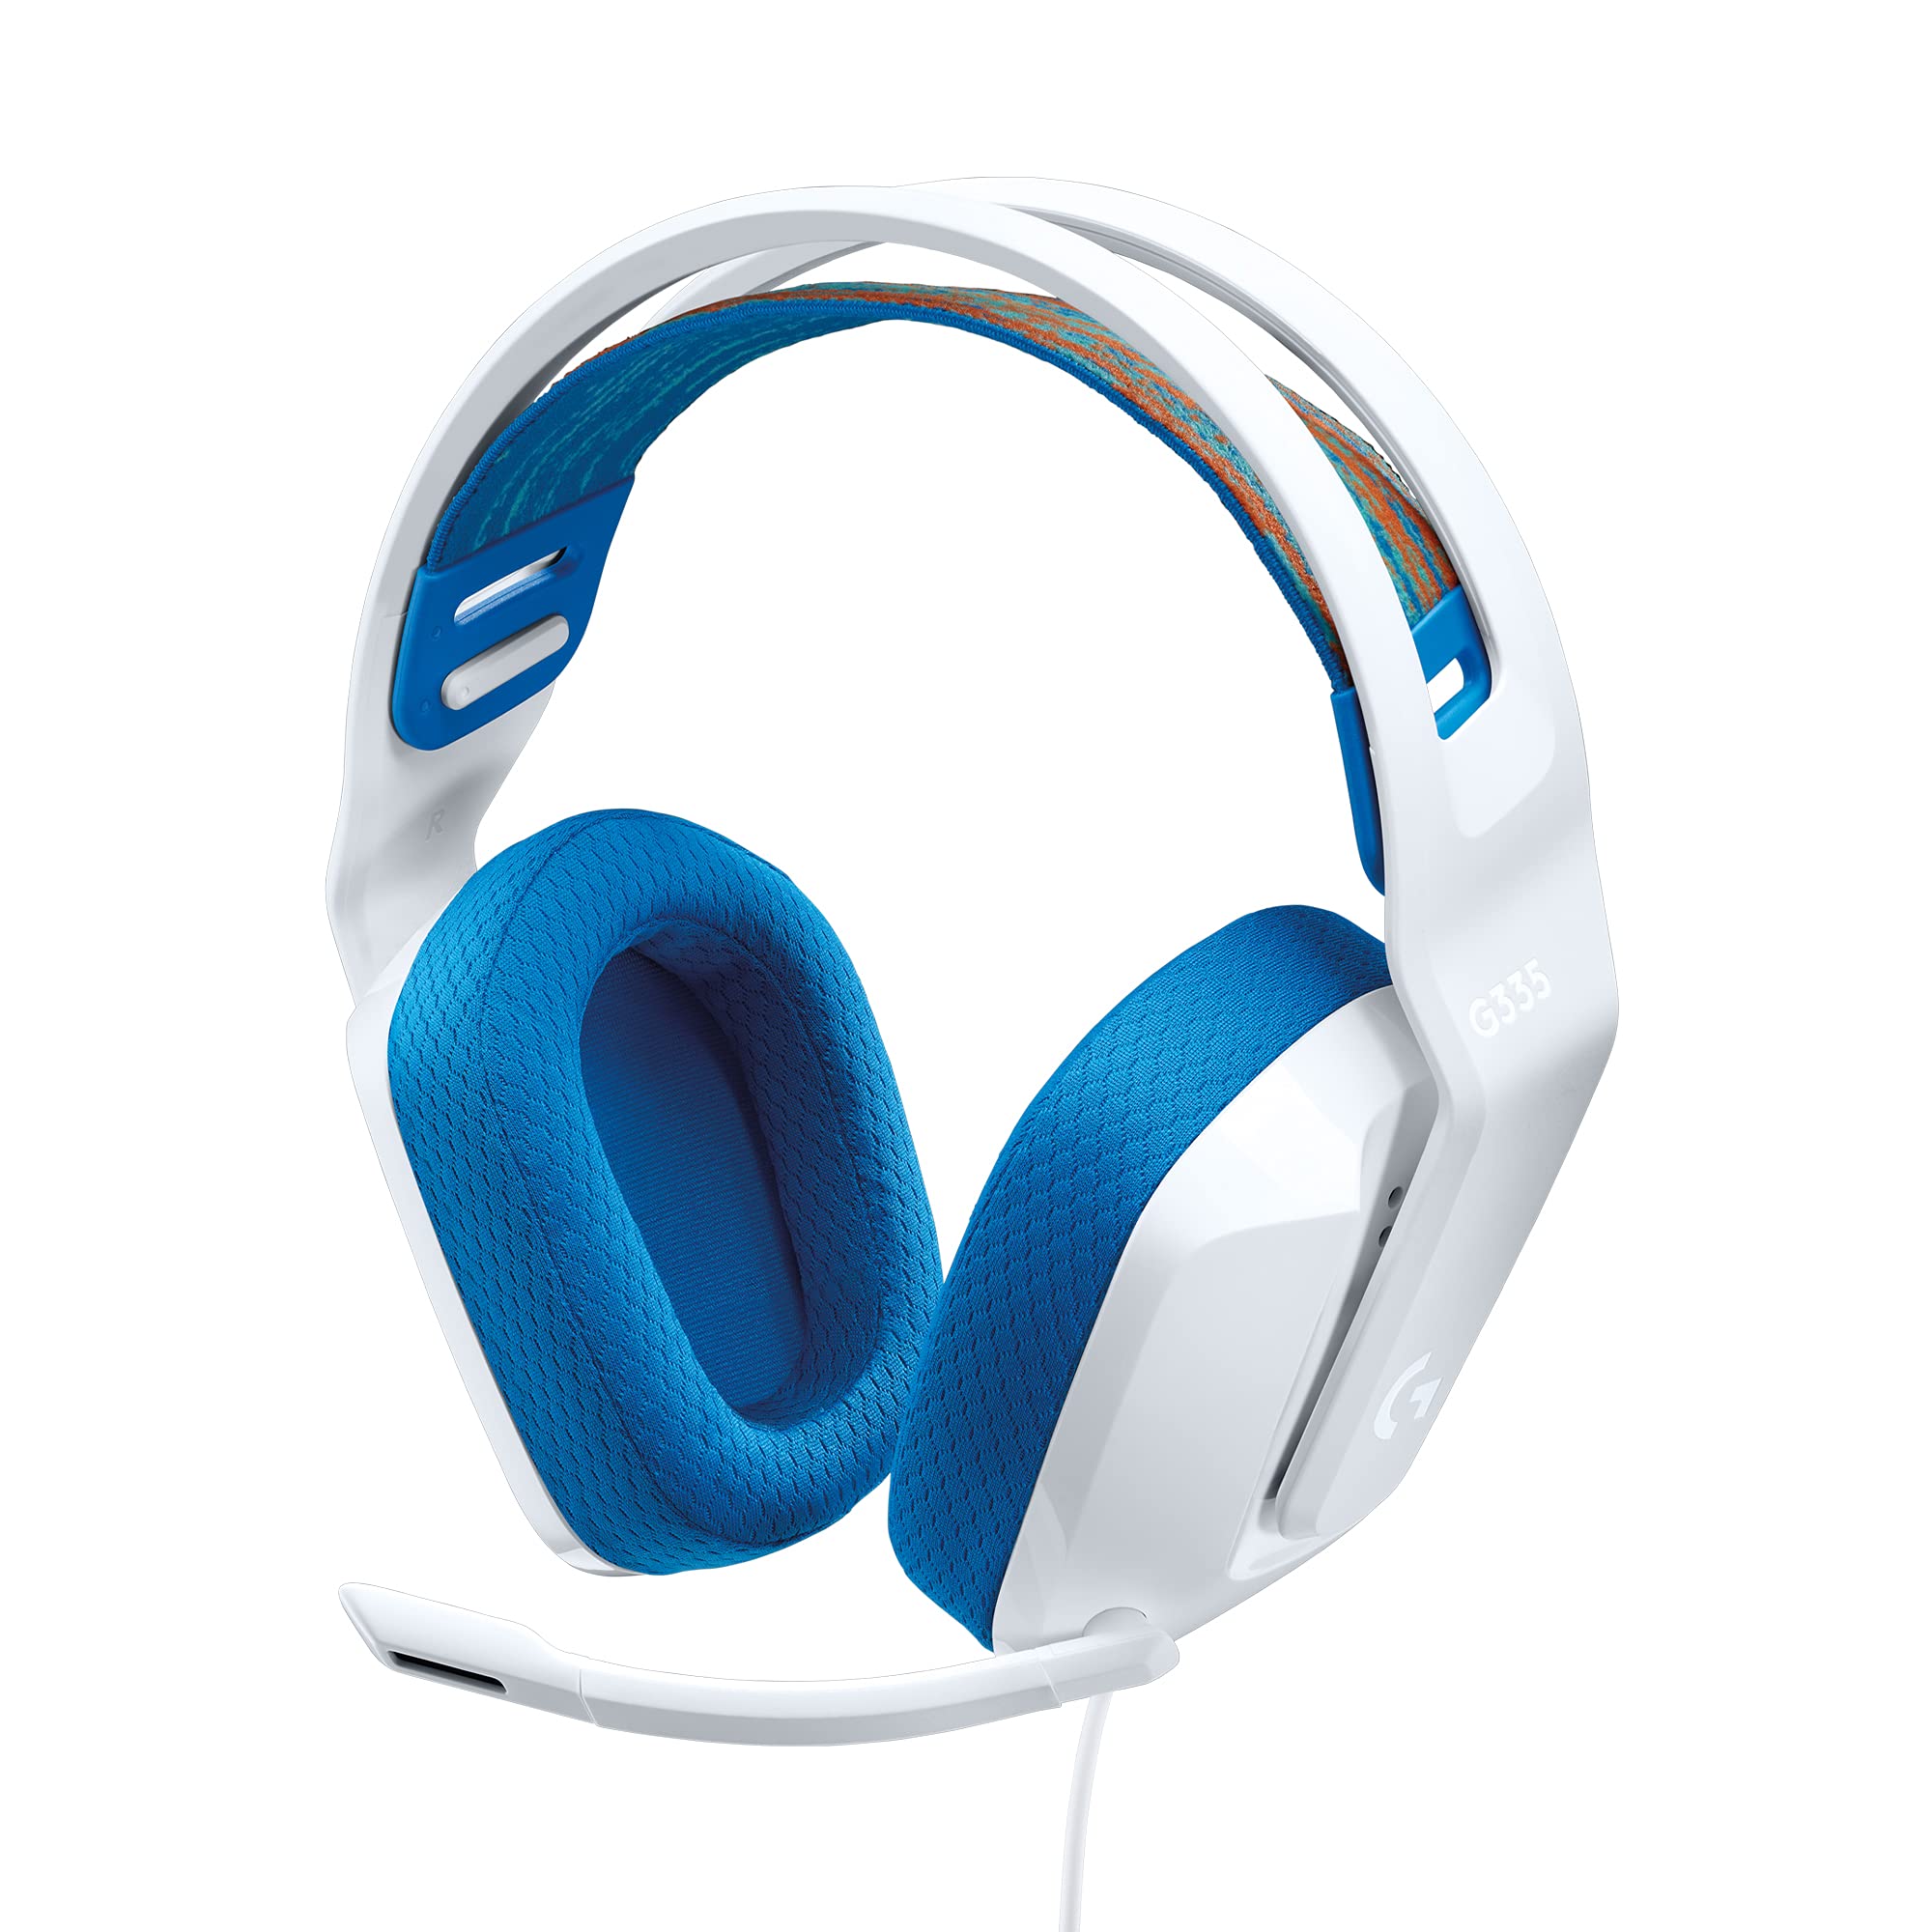 Logitech G335 Wired Gaming Headset w/ Microphone (White) $37.45 + Free Shipping